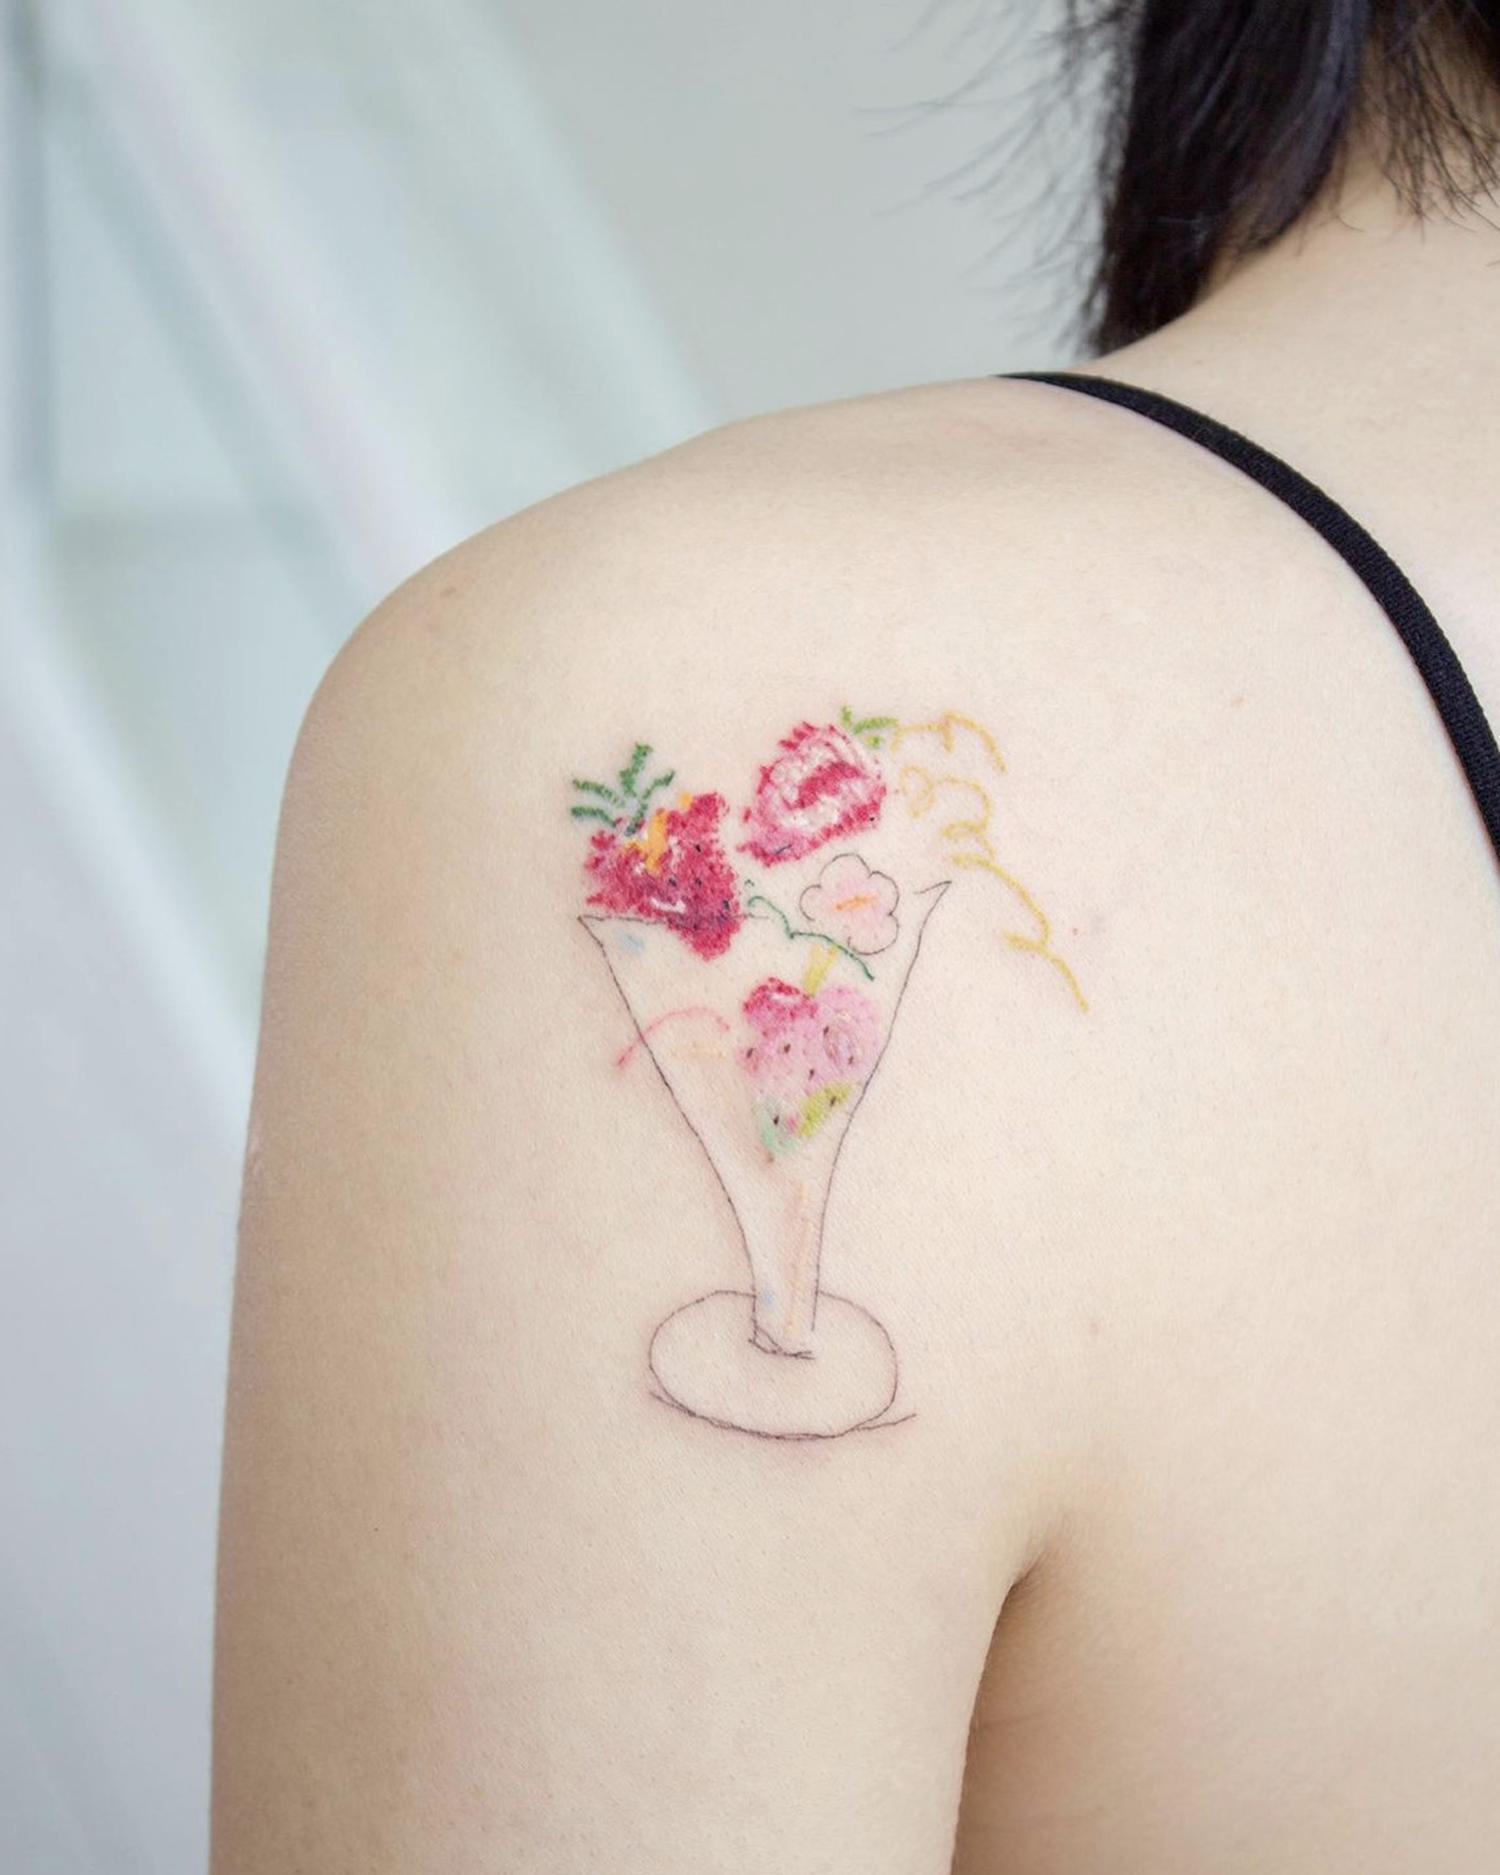 strawberry cocktail drawing tattoo on shoulder